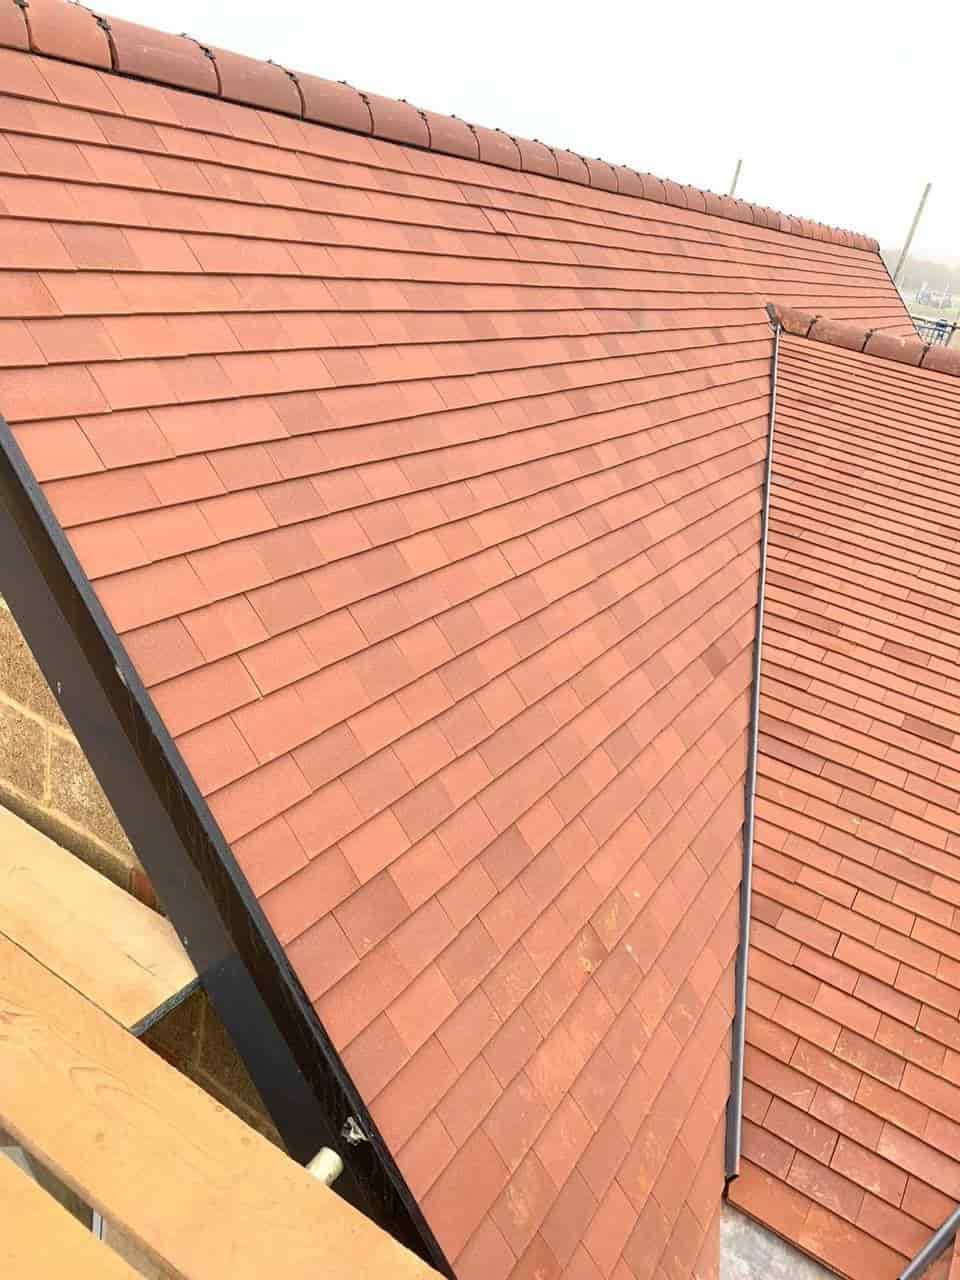 This is a photo of a new build roof installed in Hawkhurst, Kent. Works carried out by Hawkhurst Roofing